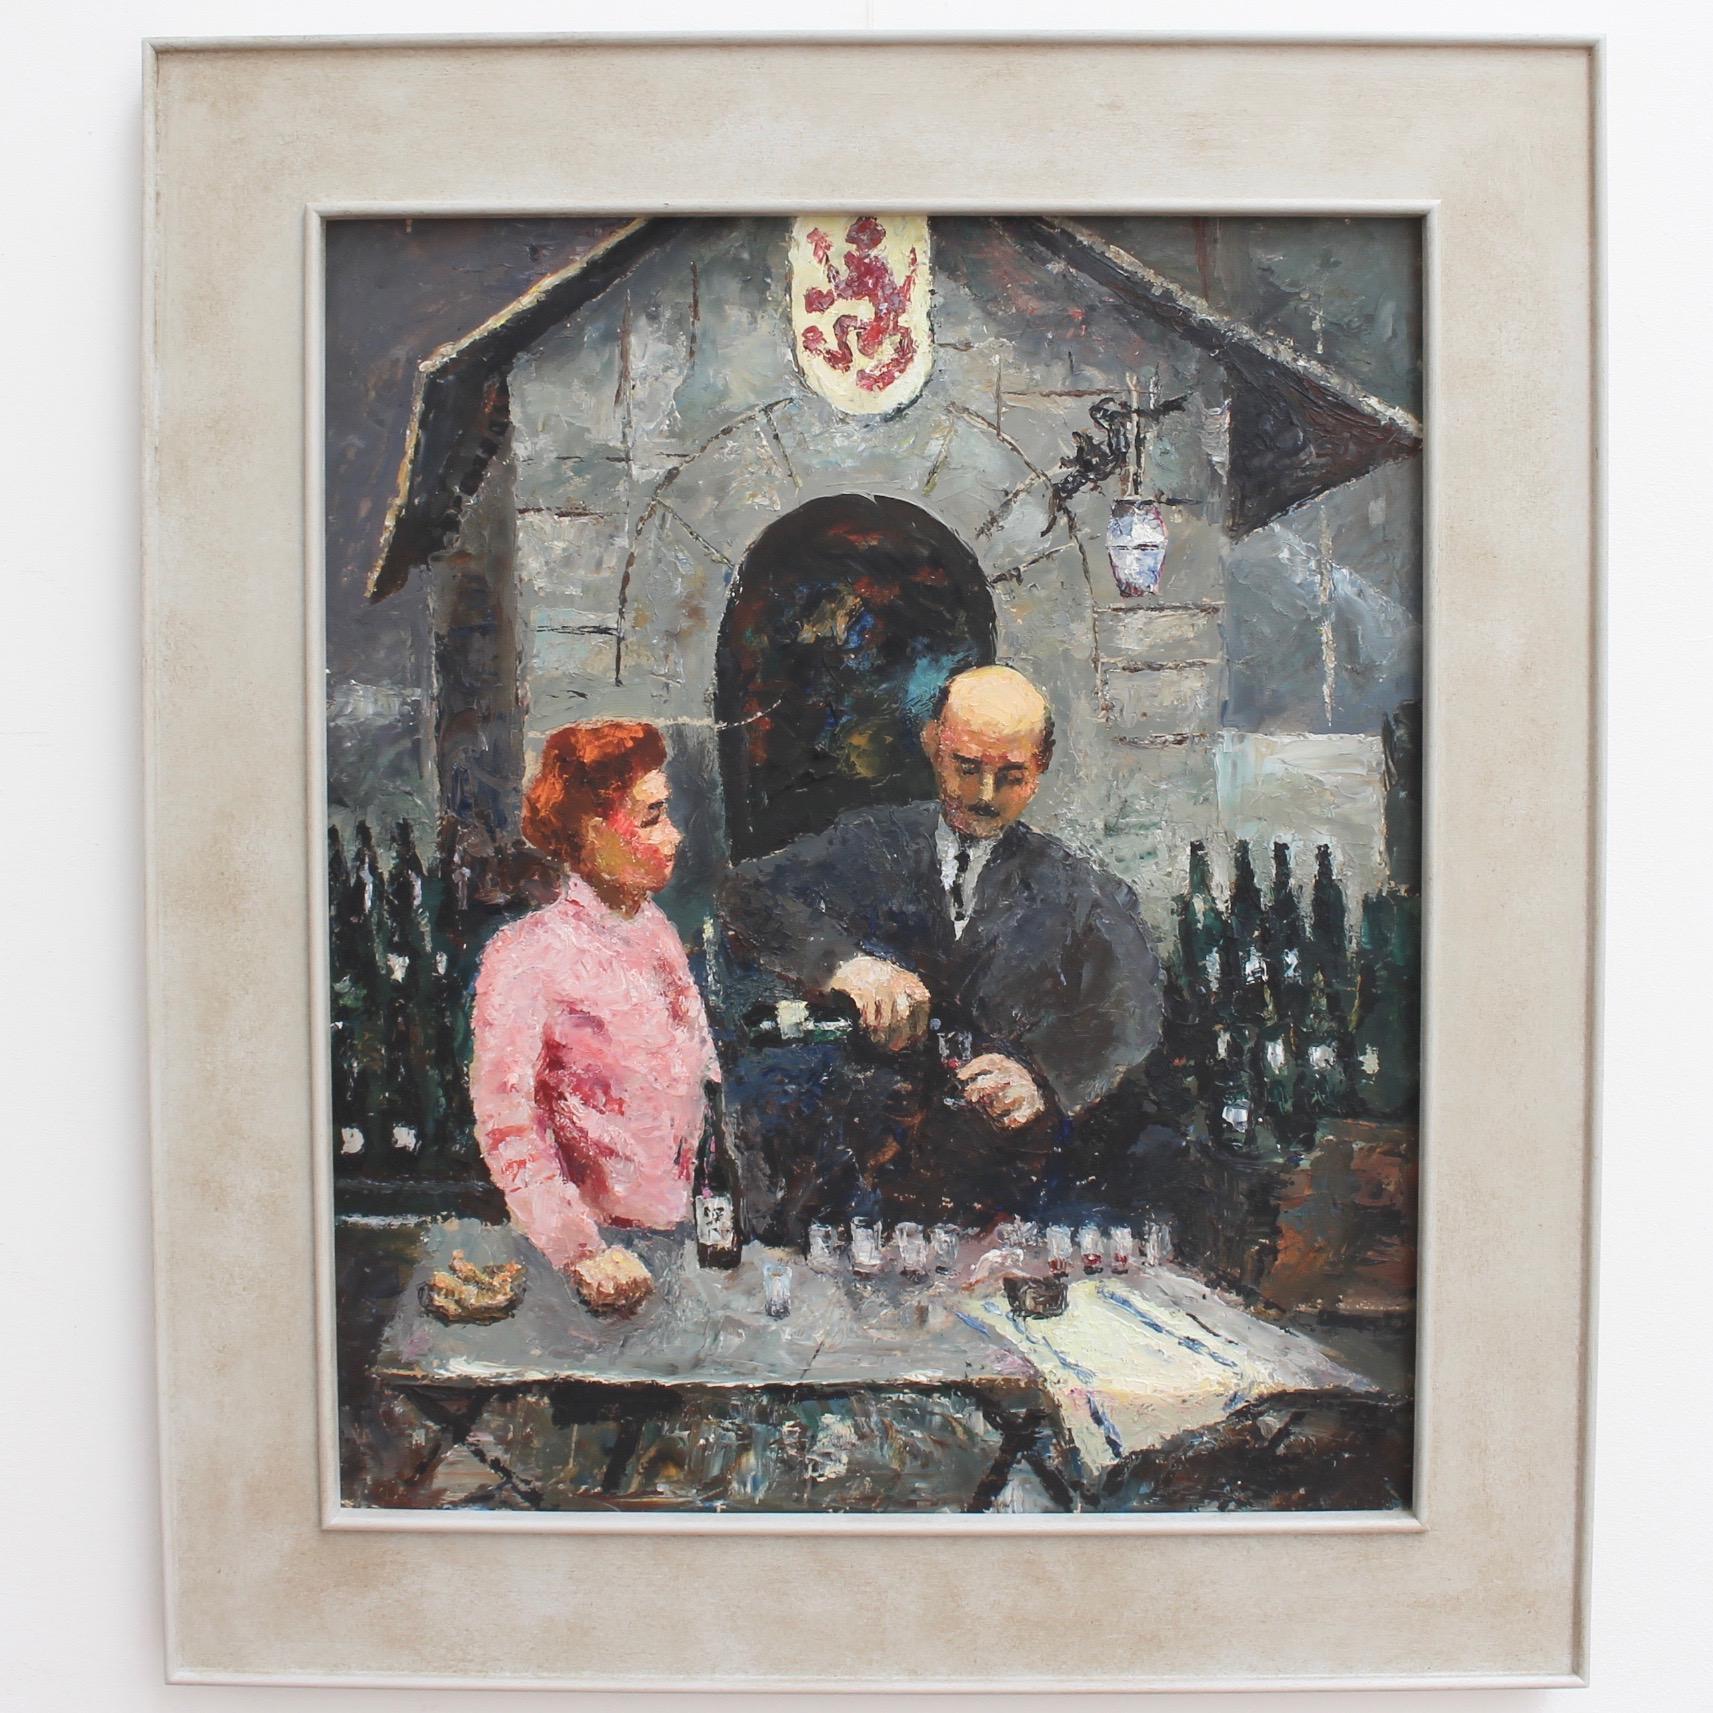 The Wines of Bergerac at the Paris Fair - Painting by Germaine Nordmann